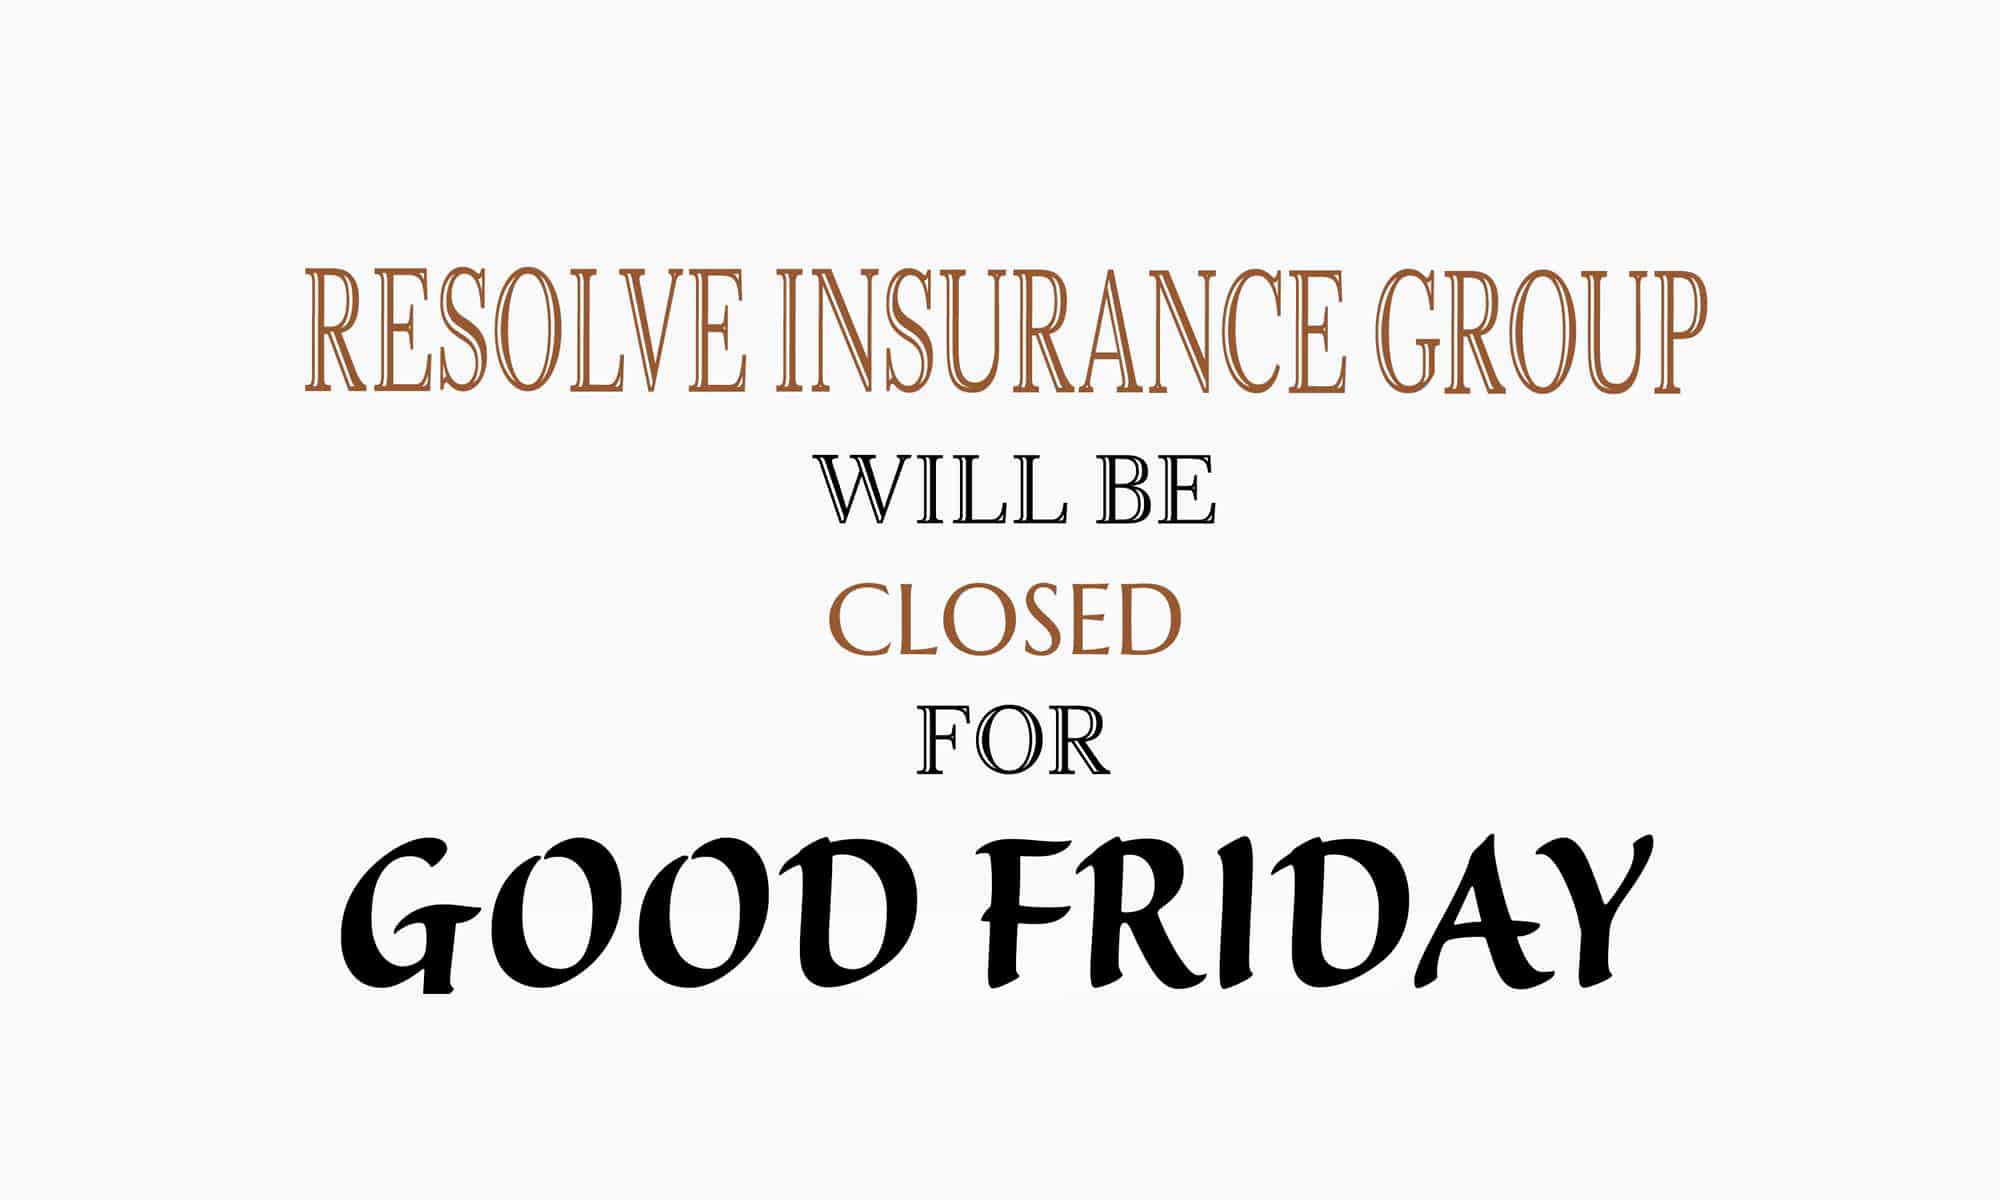 Resolve Insurance Group will be closed for Good Friday Resolve